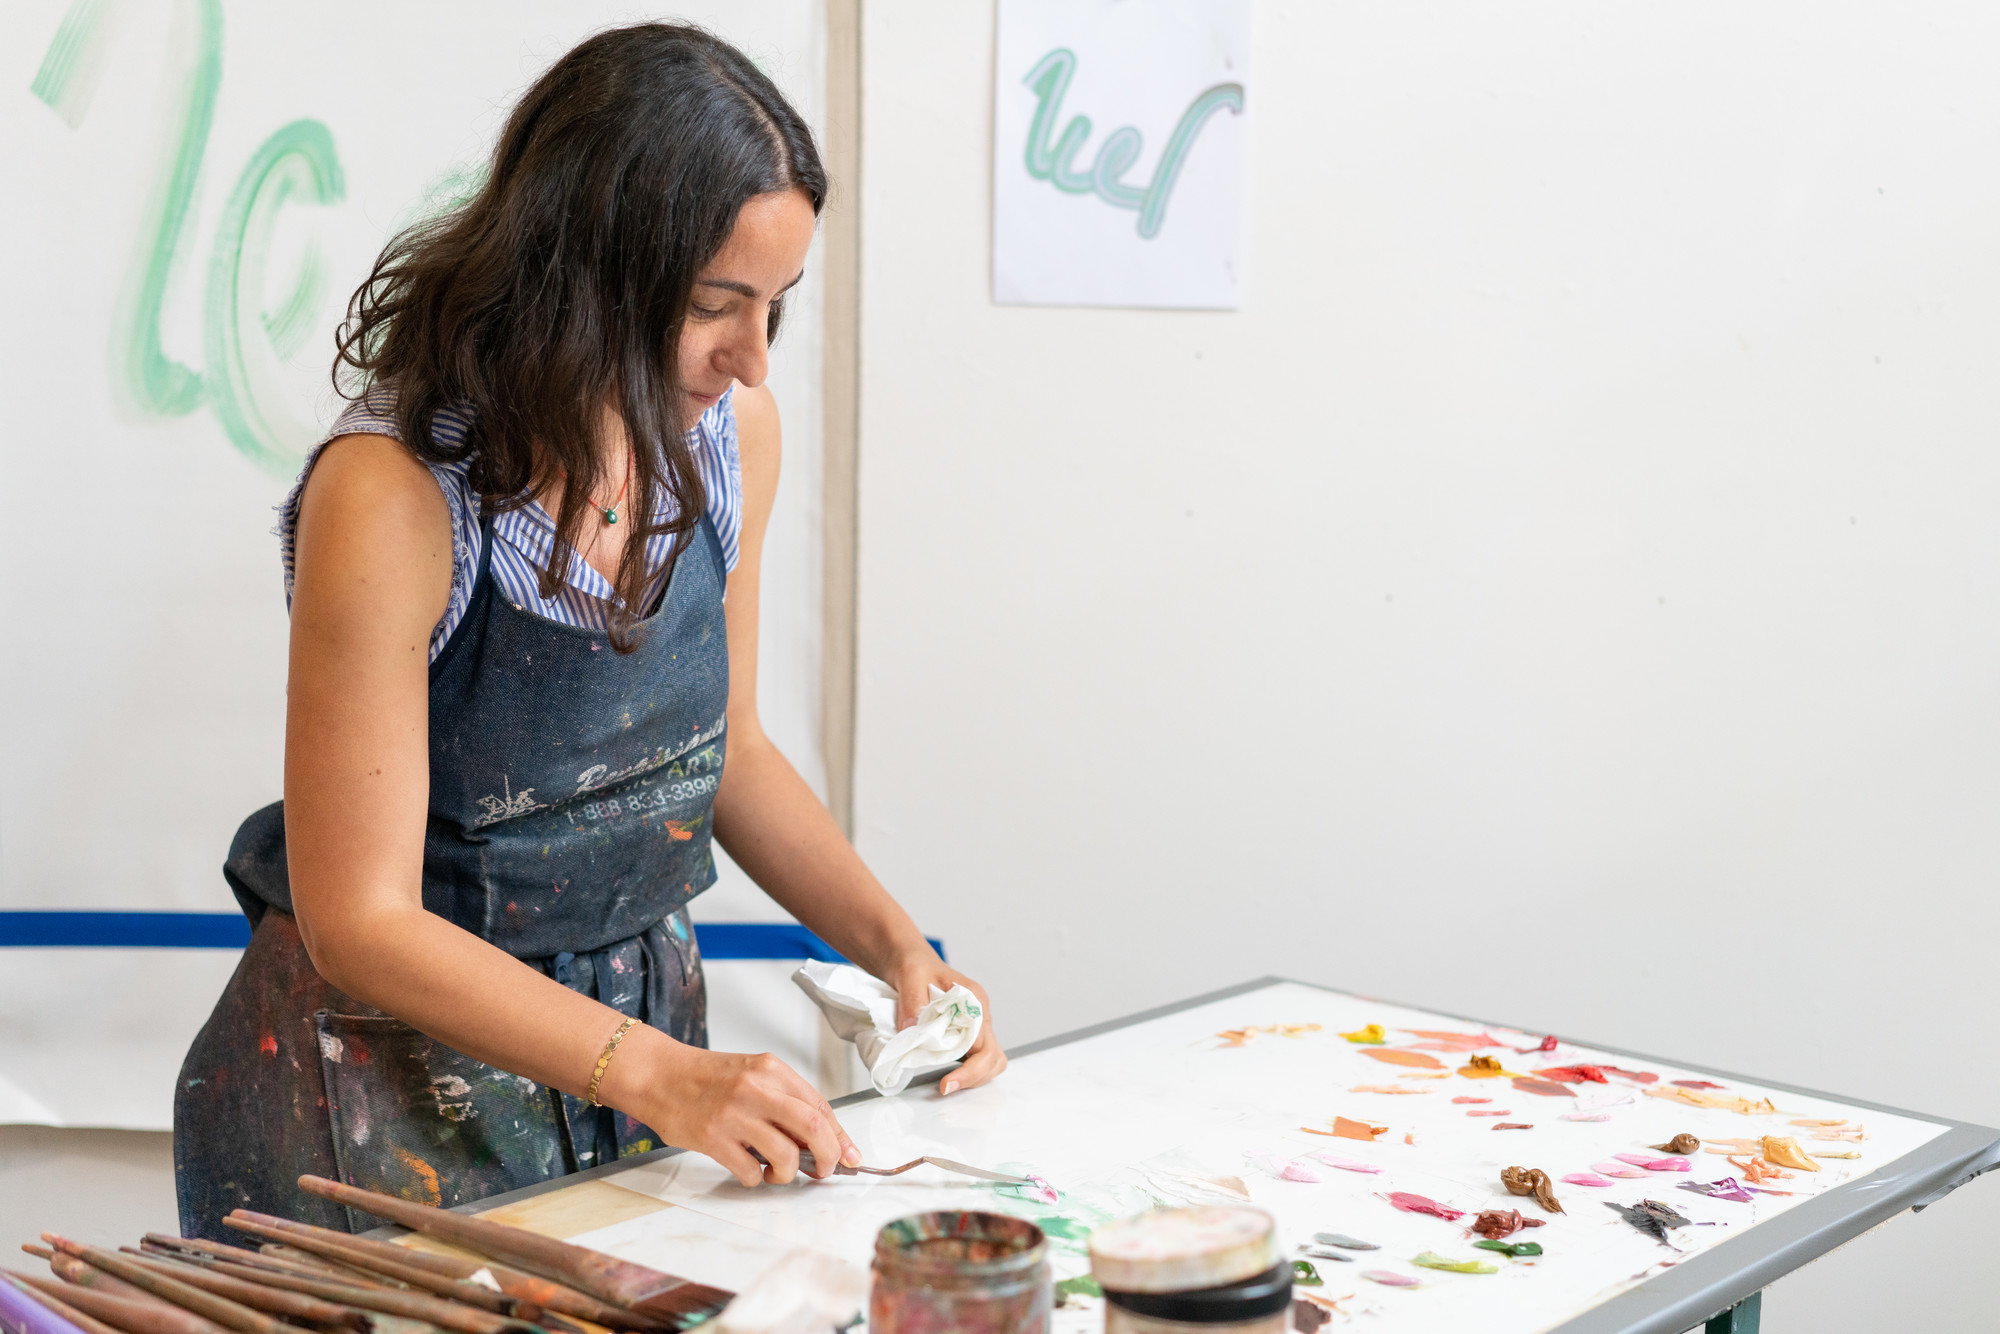 Photograph of an artist at work in the Assets for Artists studio program.